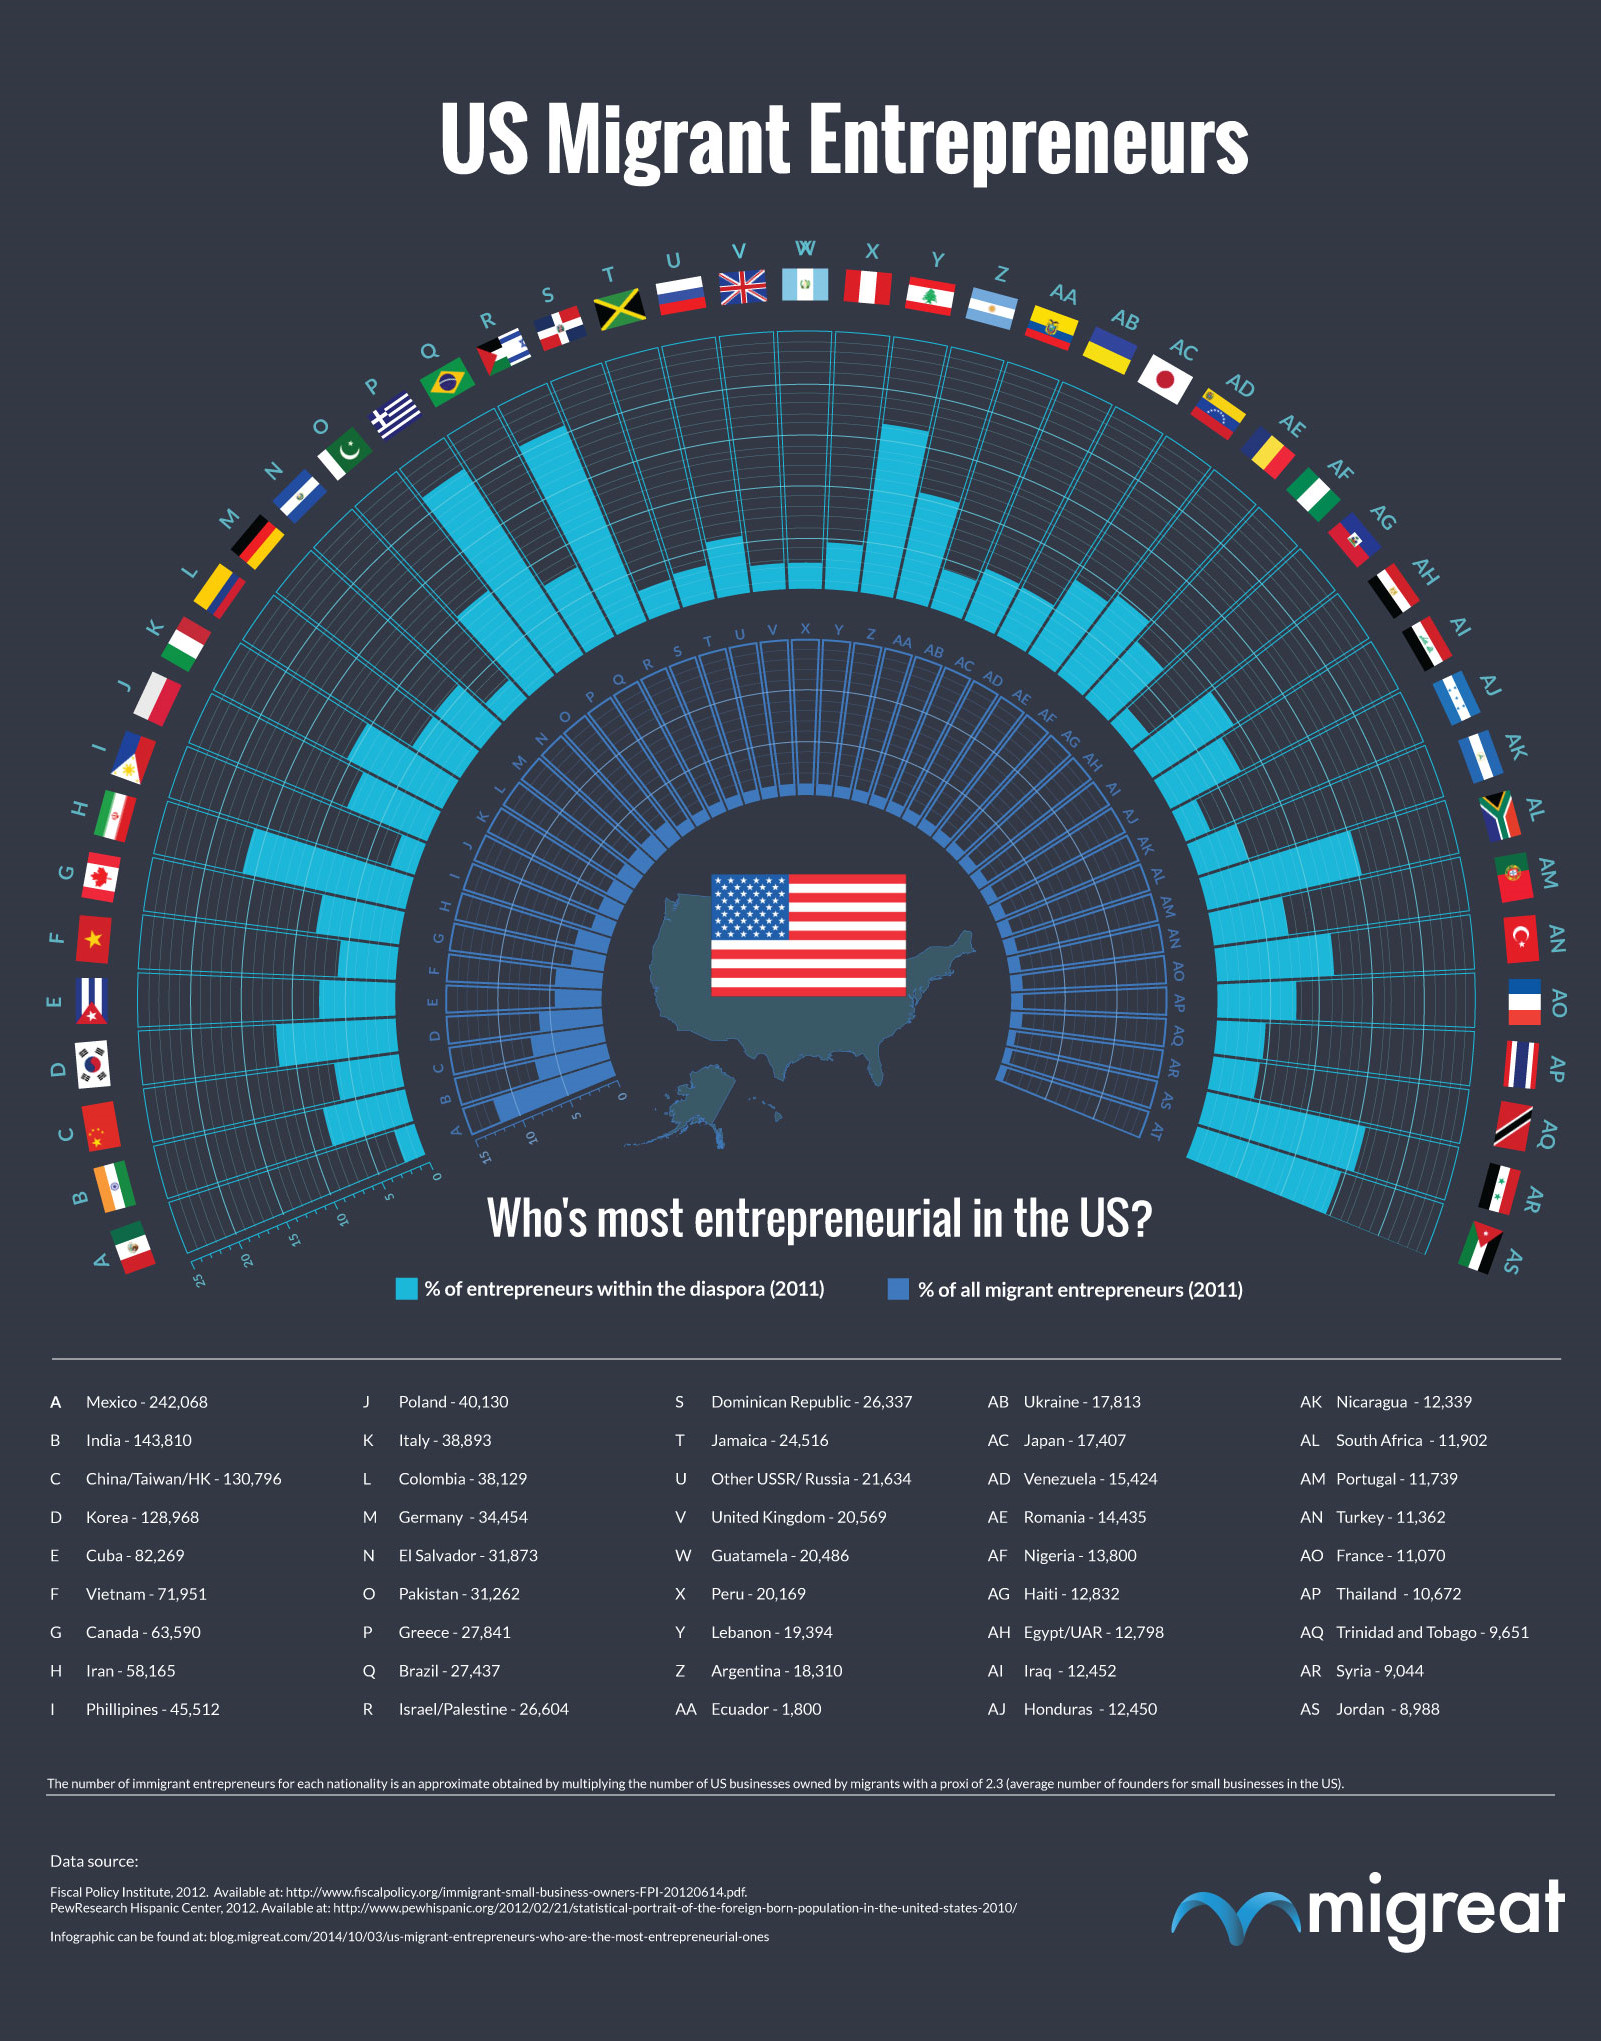 Who is the most entrepreneurial in the US?